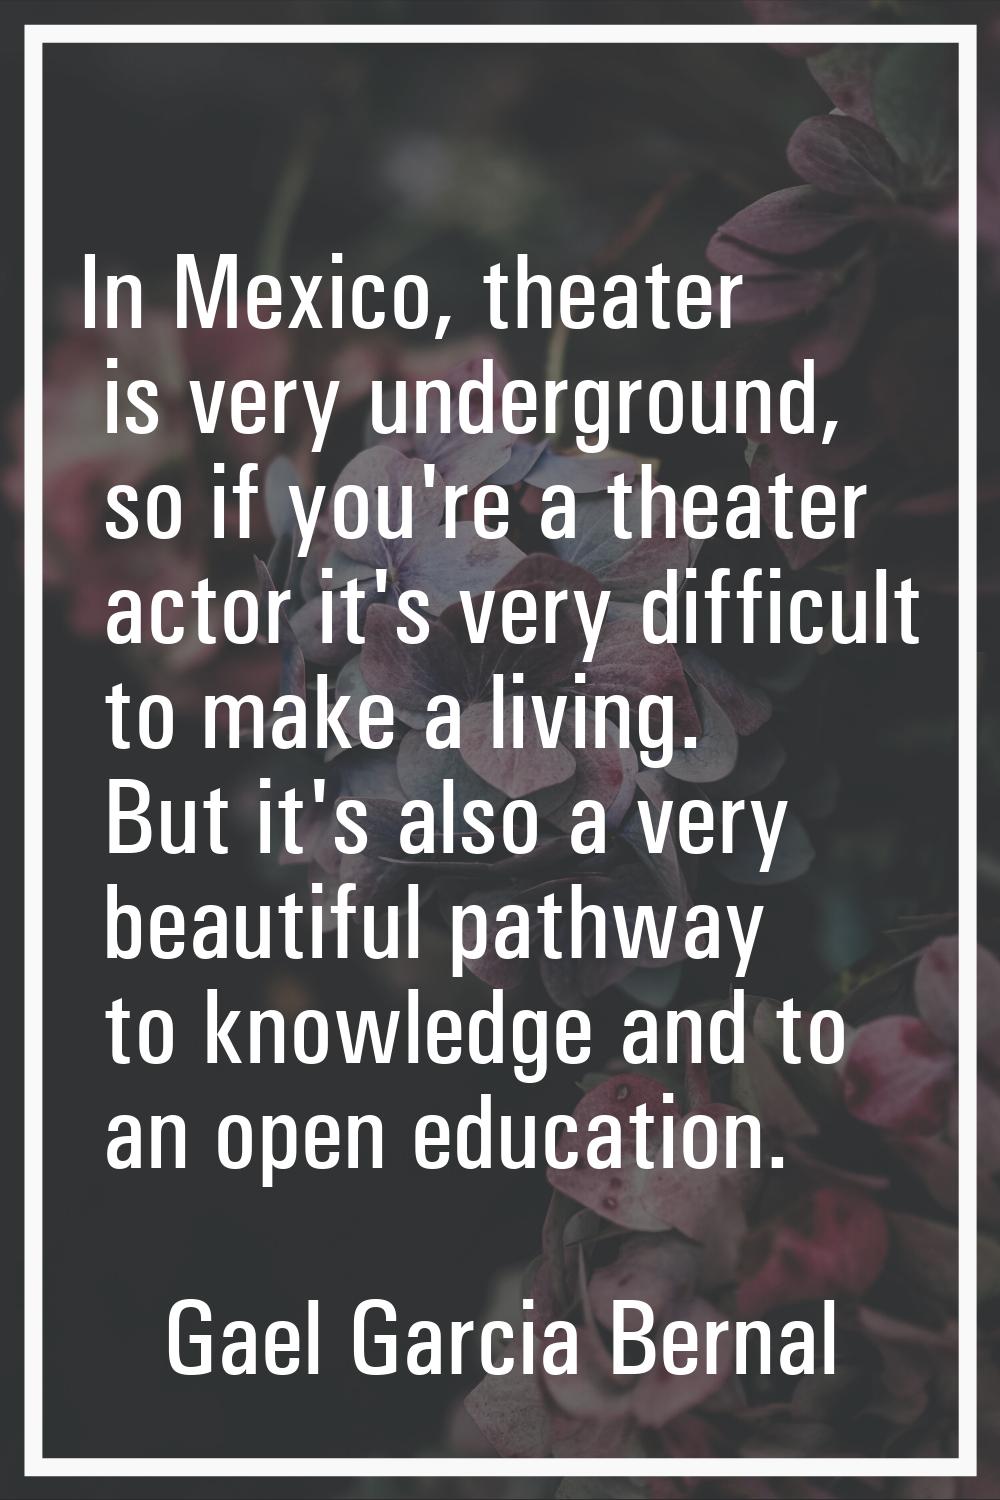 In Mexico, theater is very underground, so if you're a theater actor it's very difficult to make a 